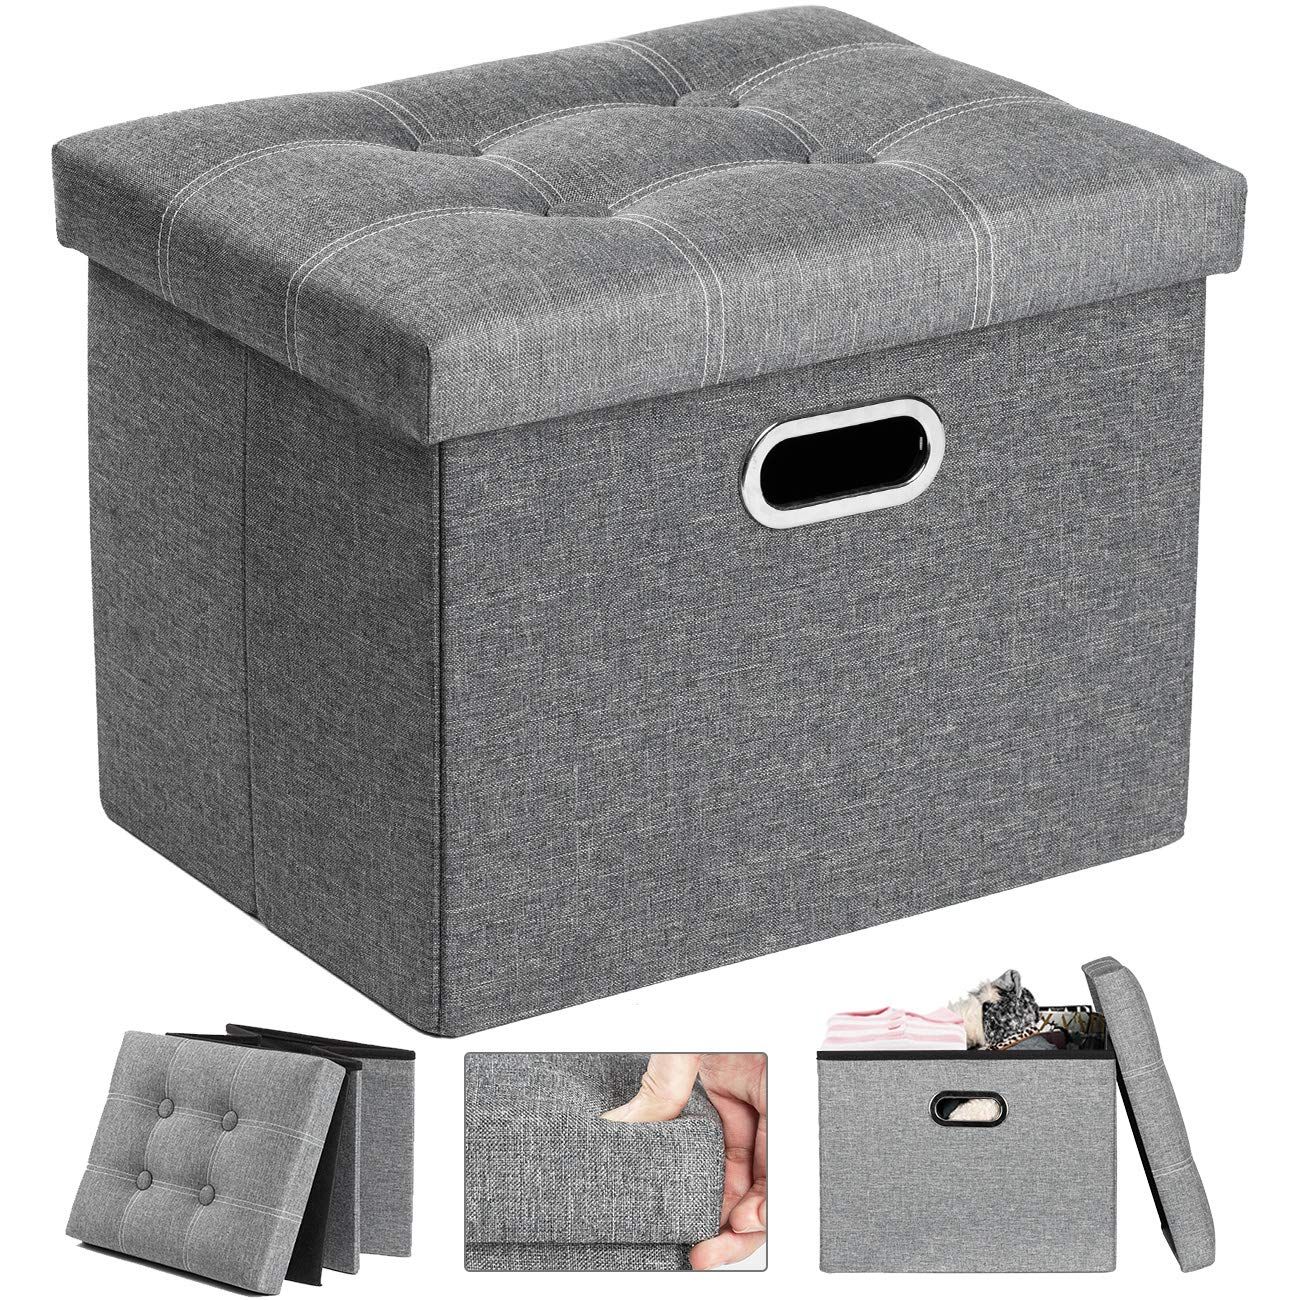 Cosyland Ottoman With Storage For Room Folding Ottoman Foot Stool Intended For Light Gray Fold Out Sleeper Ottomans (Gallery 19 of 20)